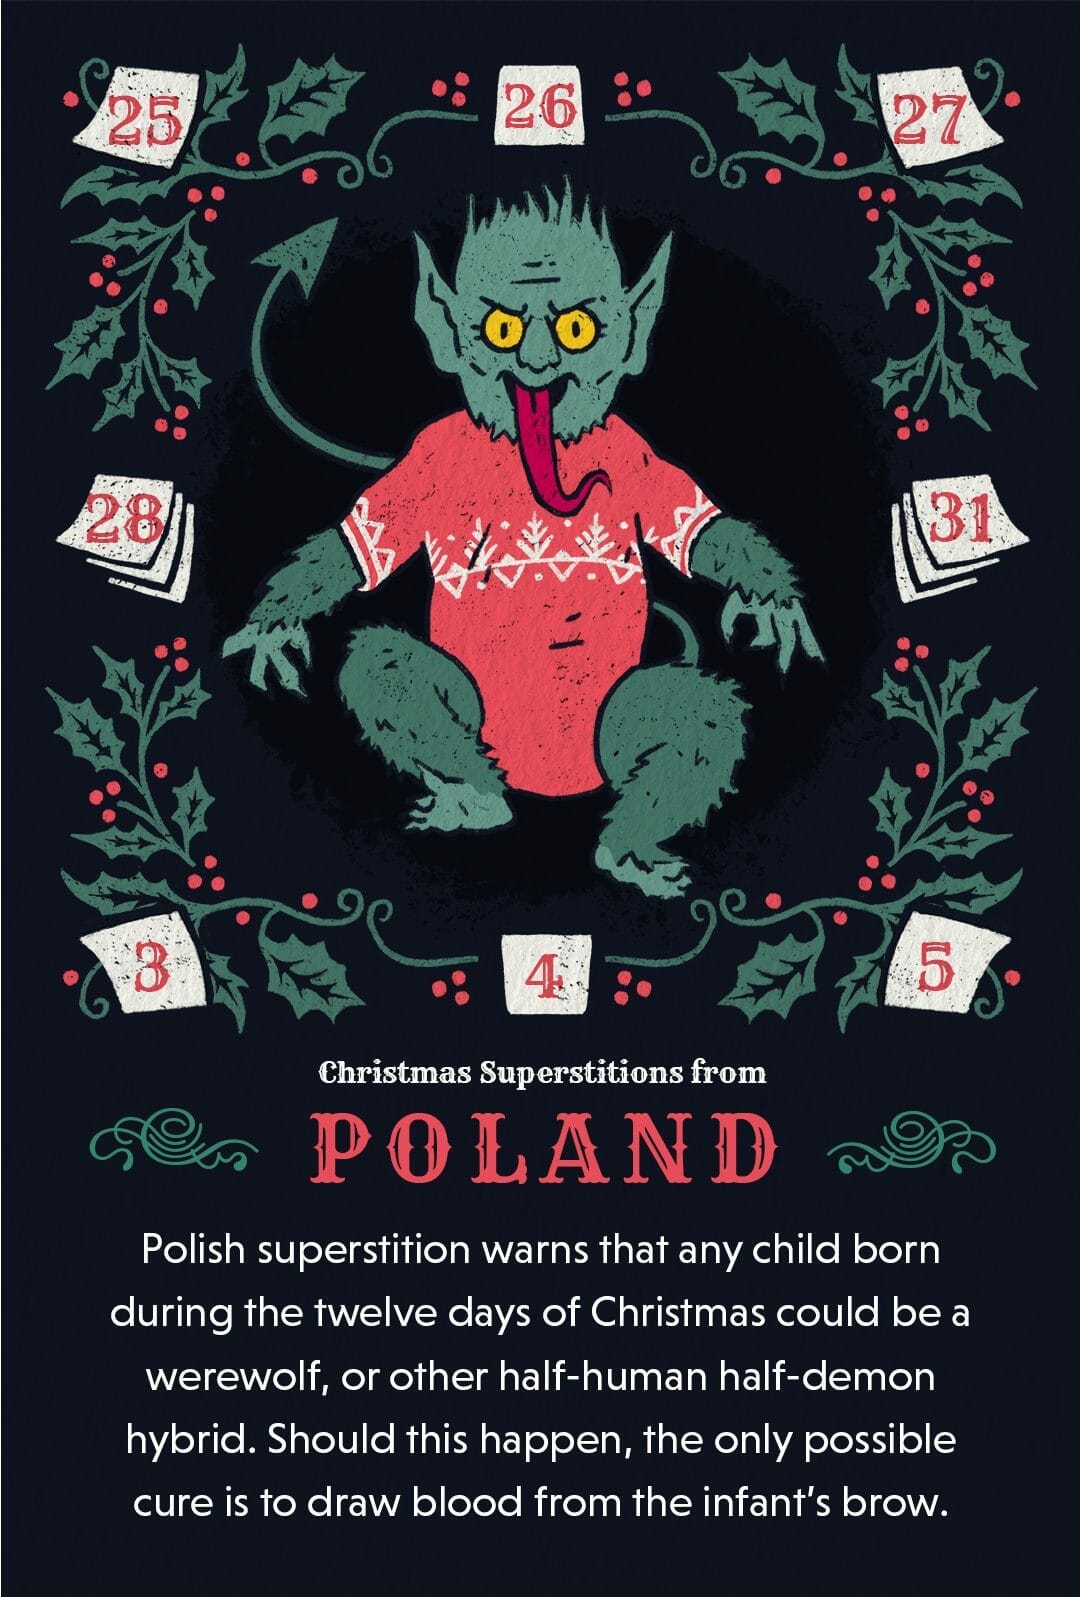 Unusual Christmas folklore from Poland